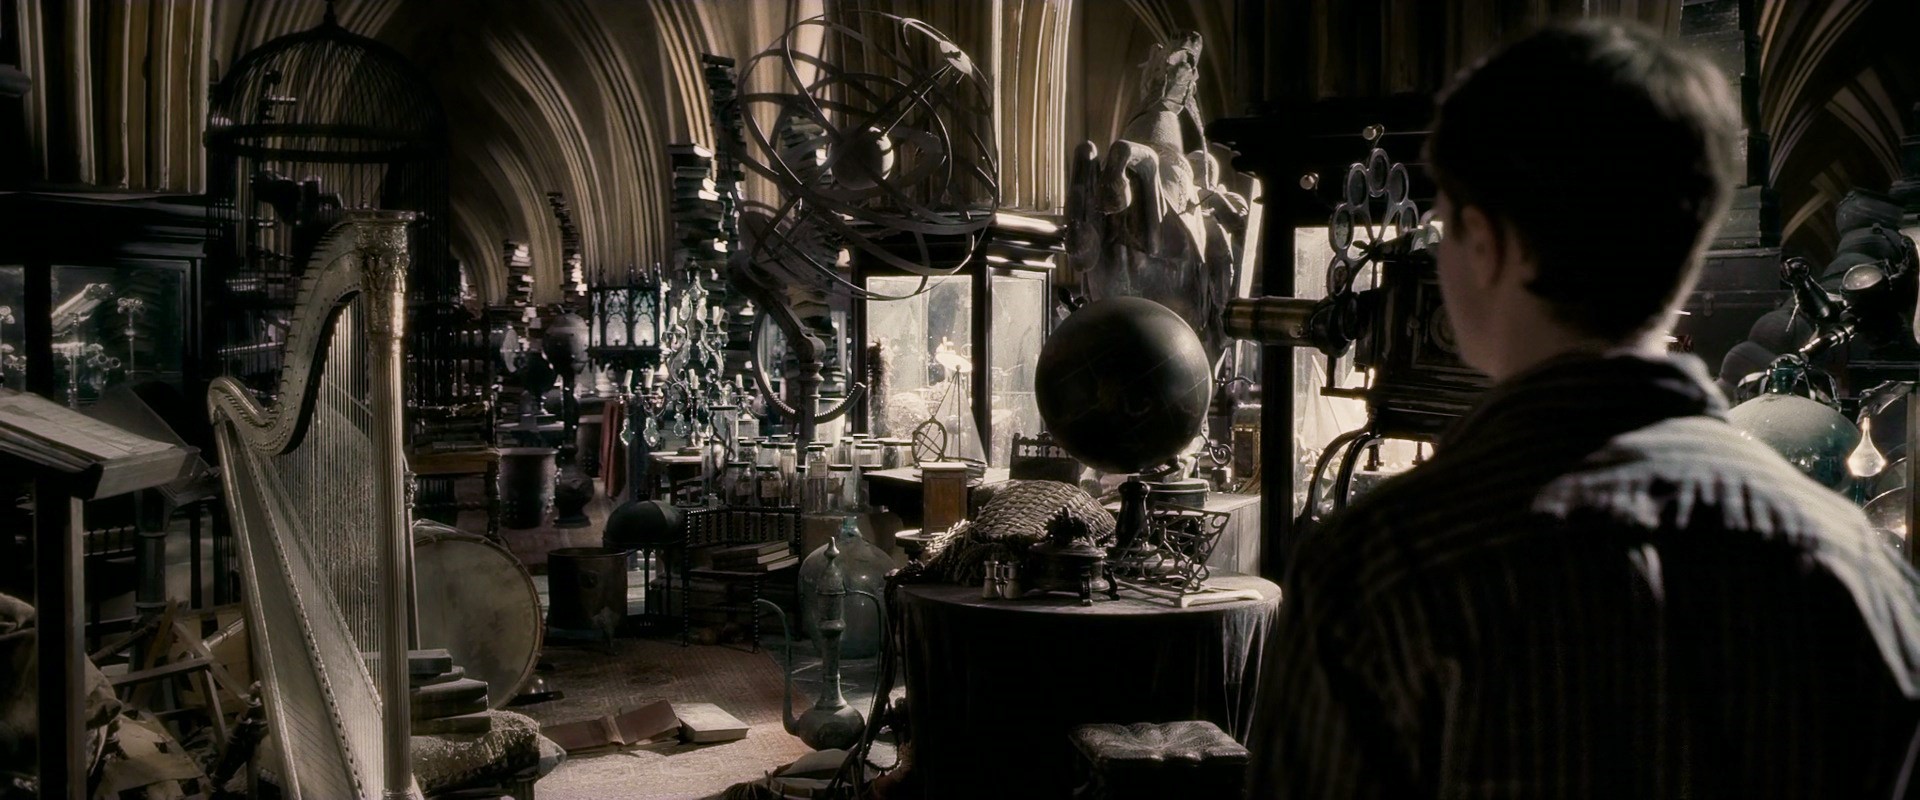 The Cinematic Magic of the Room of Requirement in the Harry Potter Movies 2